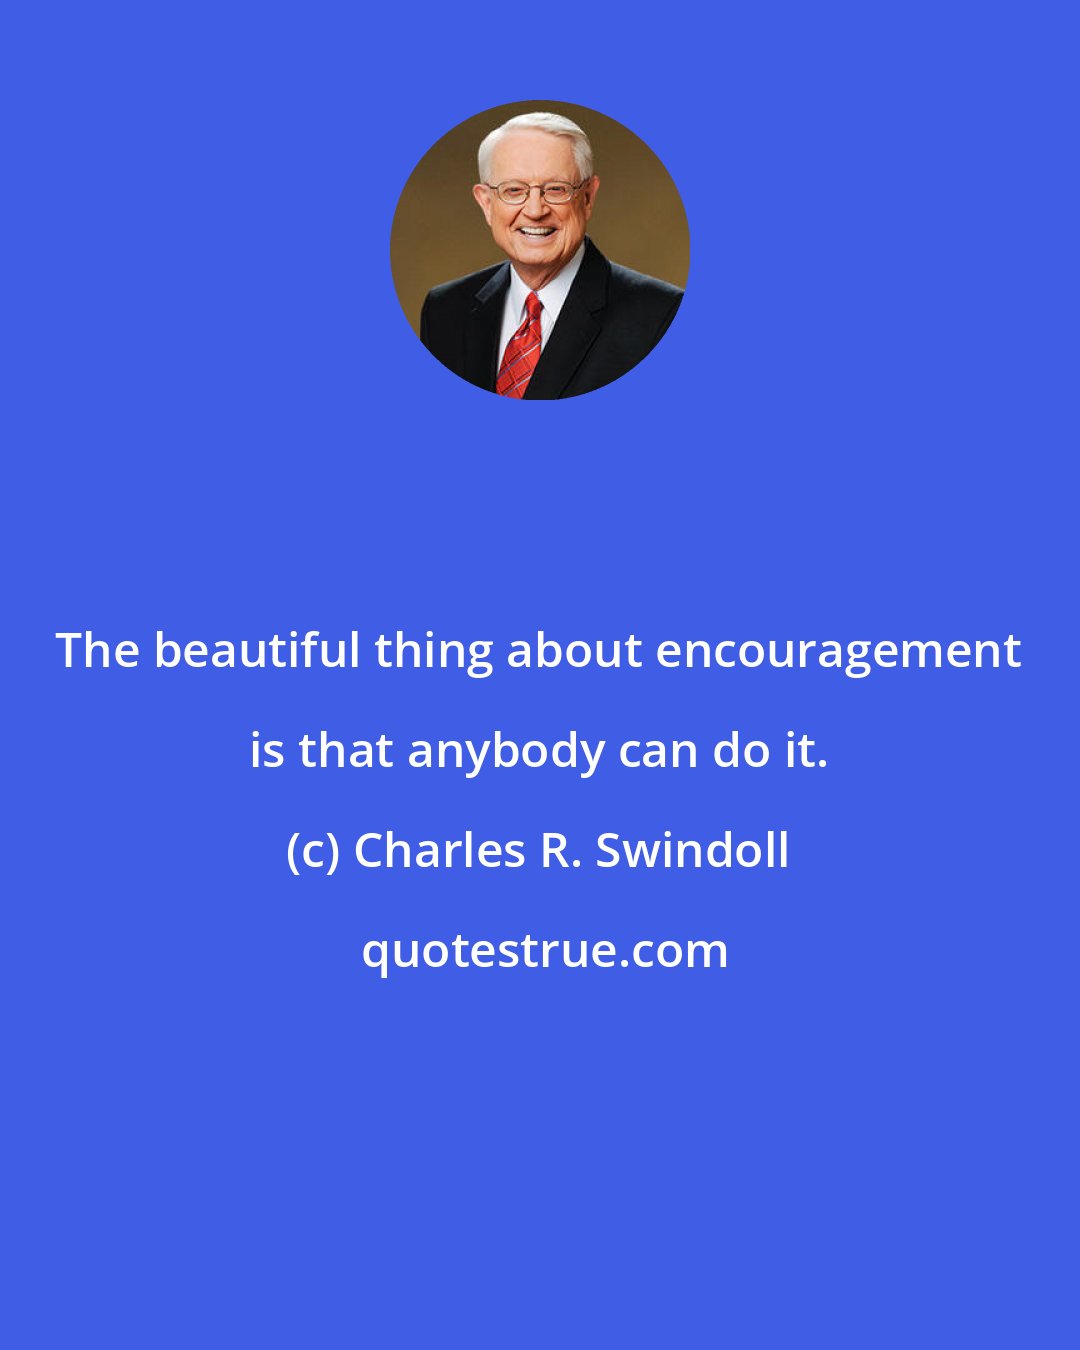 Charles R. Swindoll: The beautiful thing about encouragement is that anybody can do it.